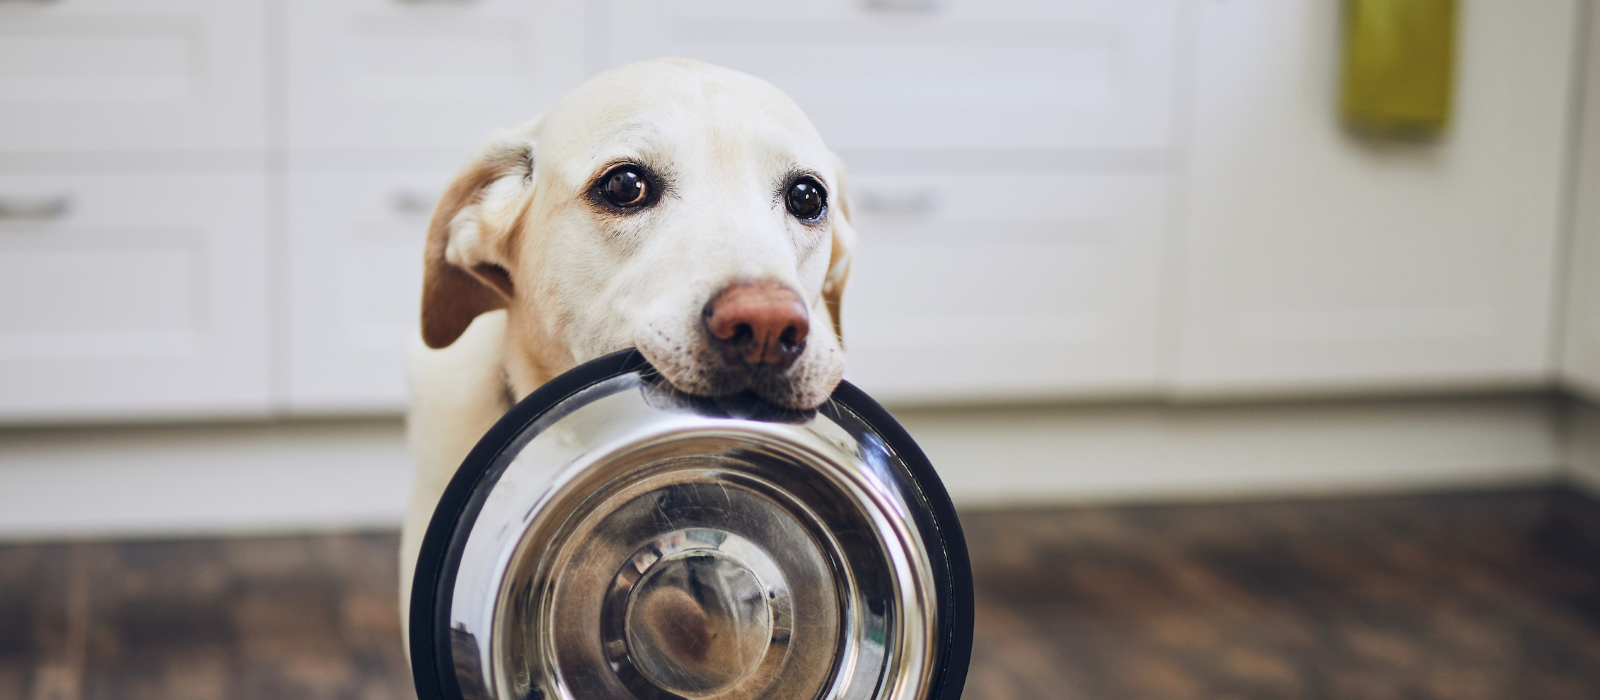 How to Choose the Right Food for Your Dog